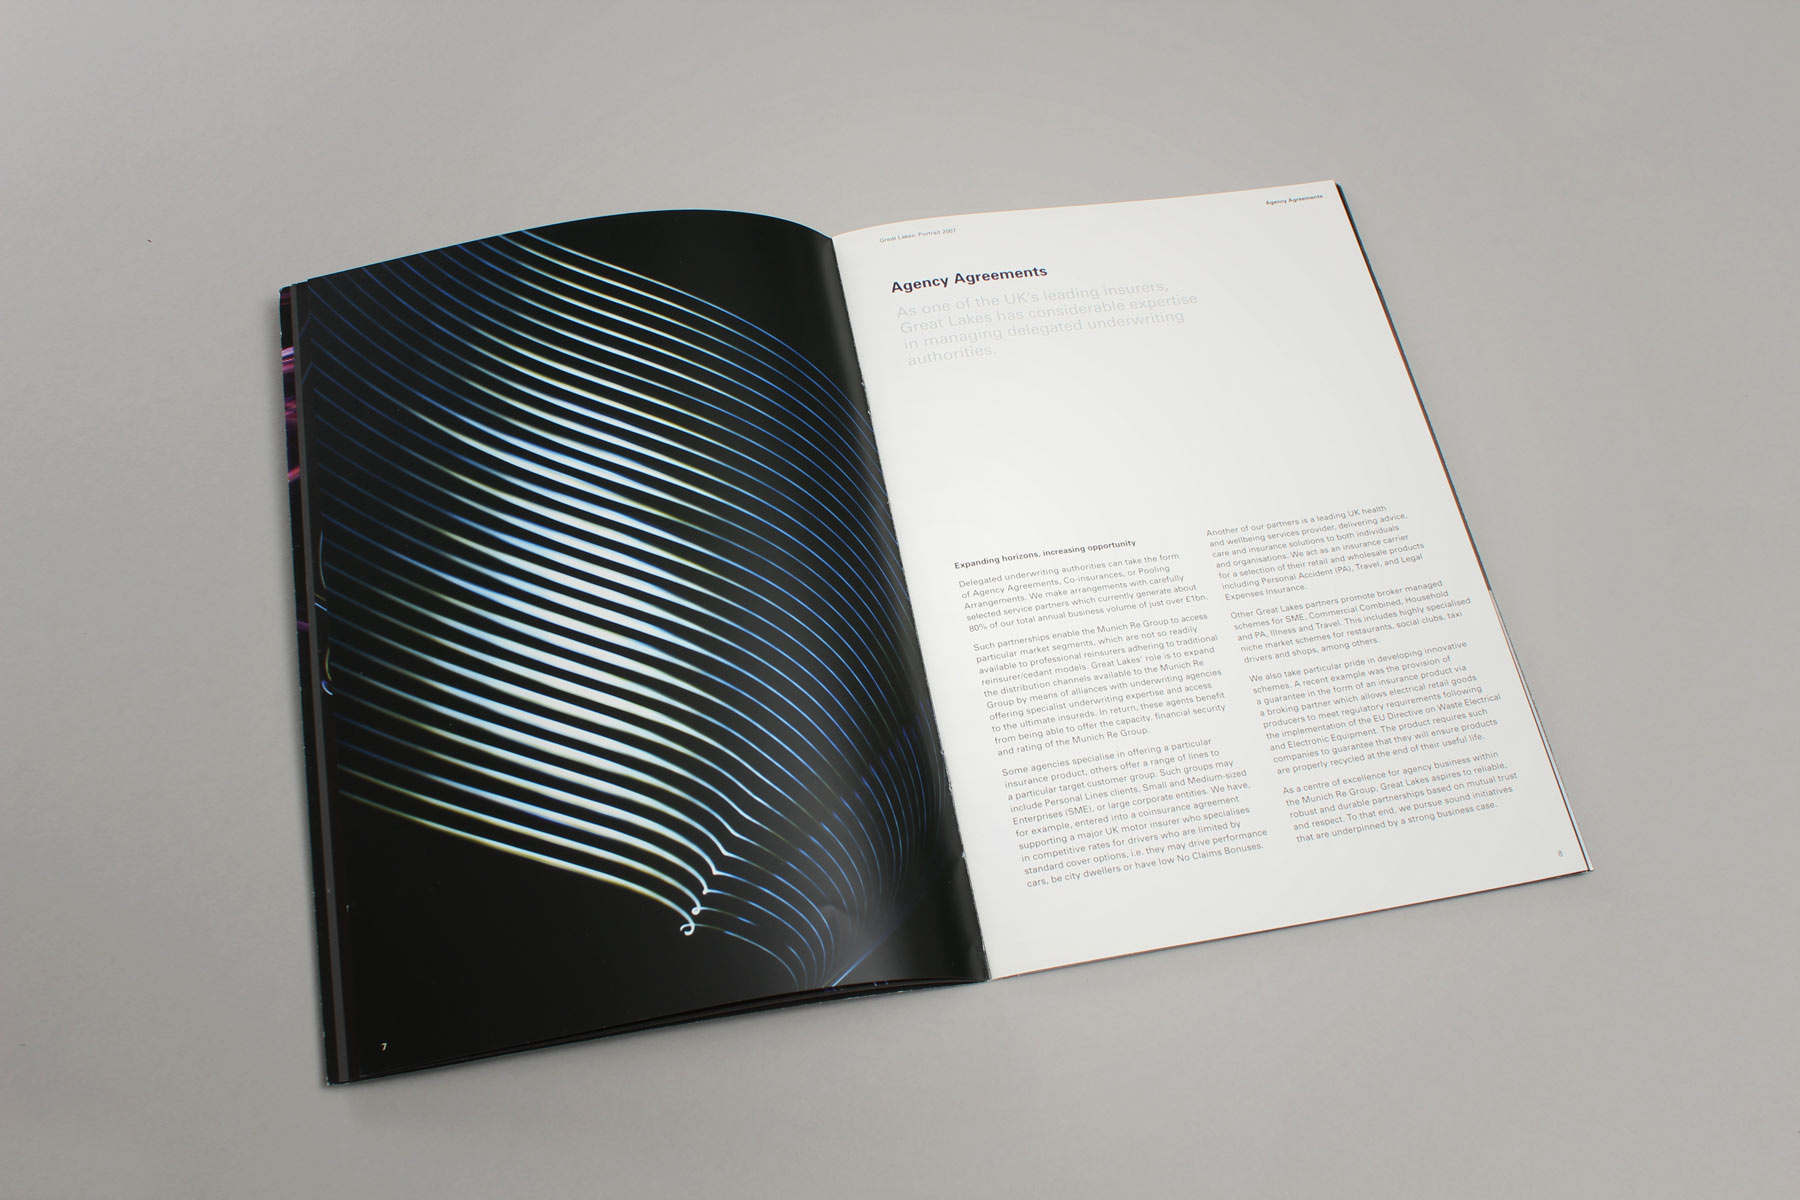 The brochure used imagery combined with a more formal and minimal text approach creating an business led publication.